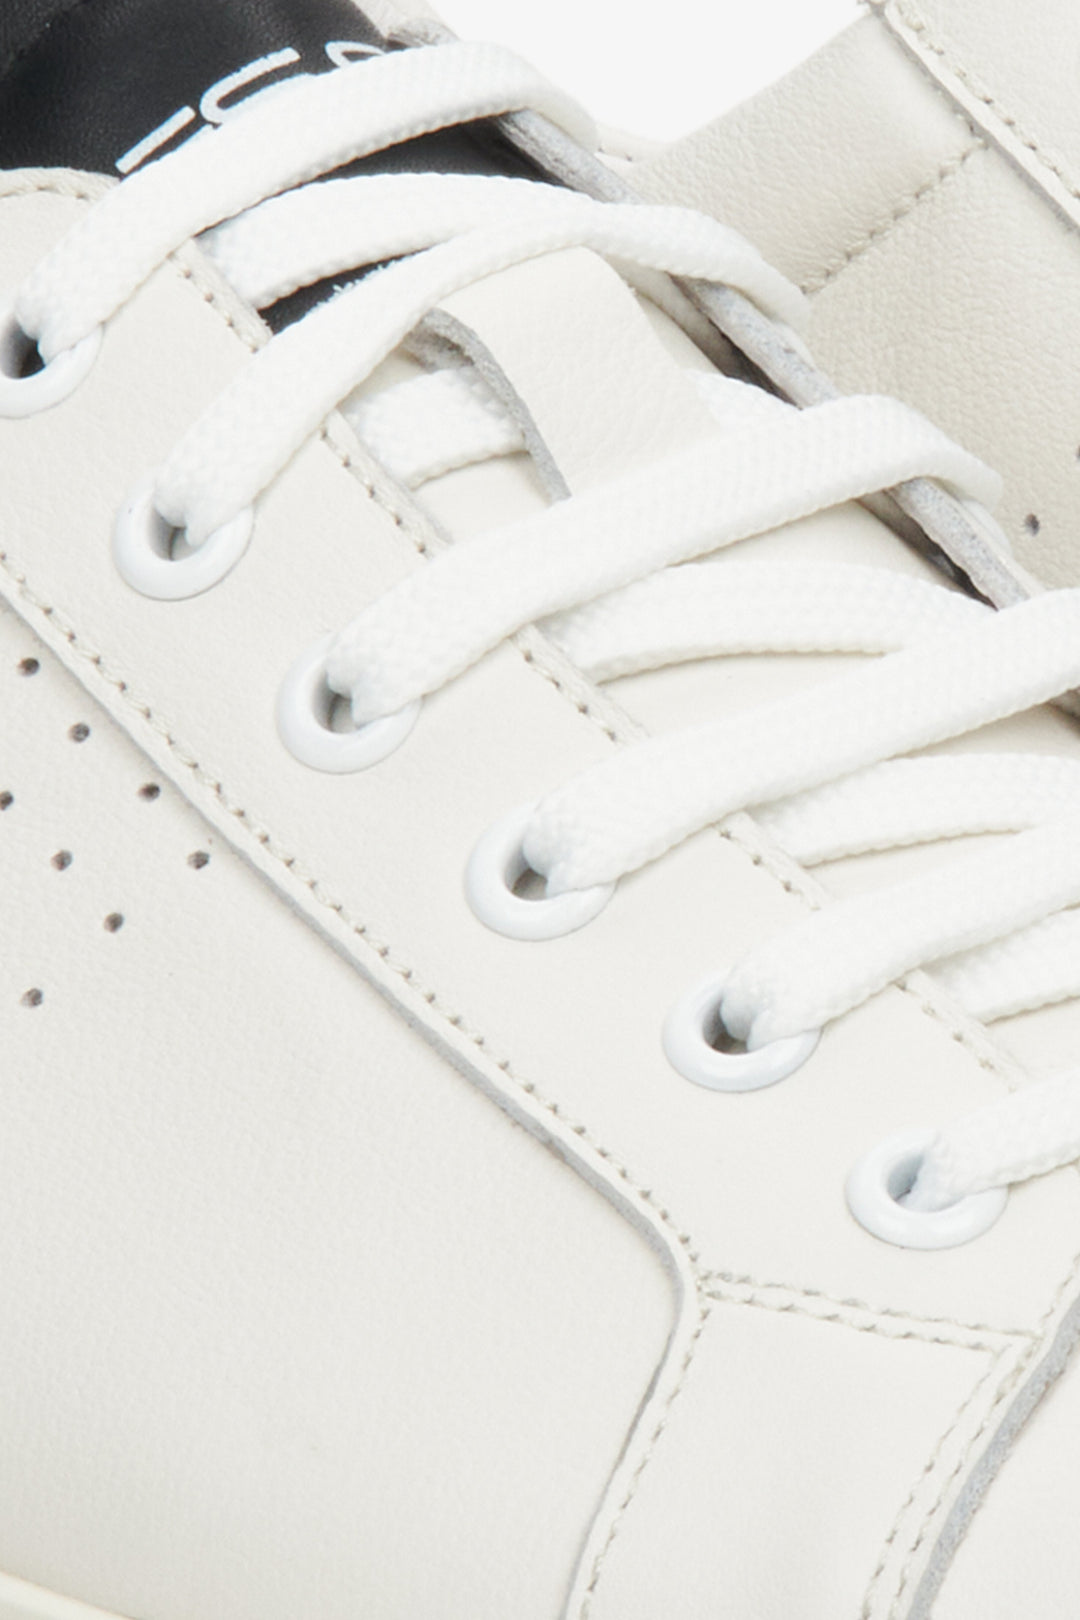 Men's black and white sneakers for spring and autumn - close-up on the details.